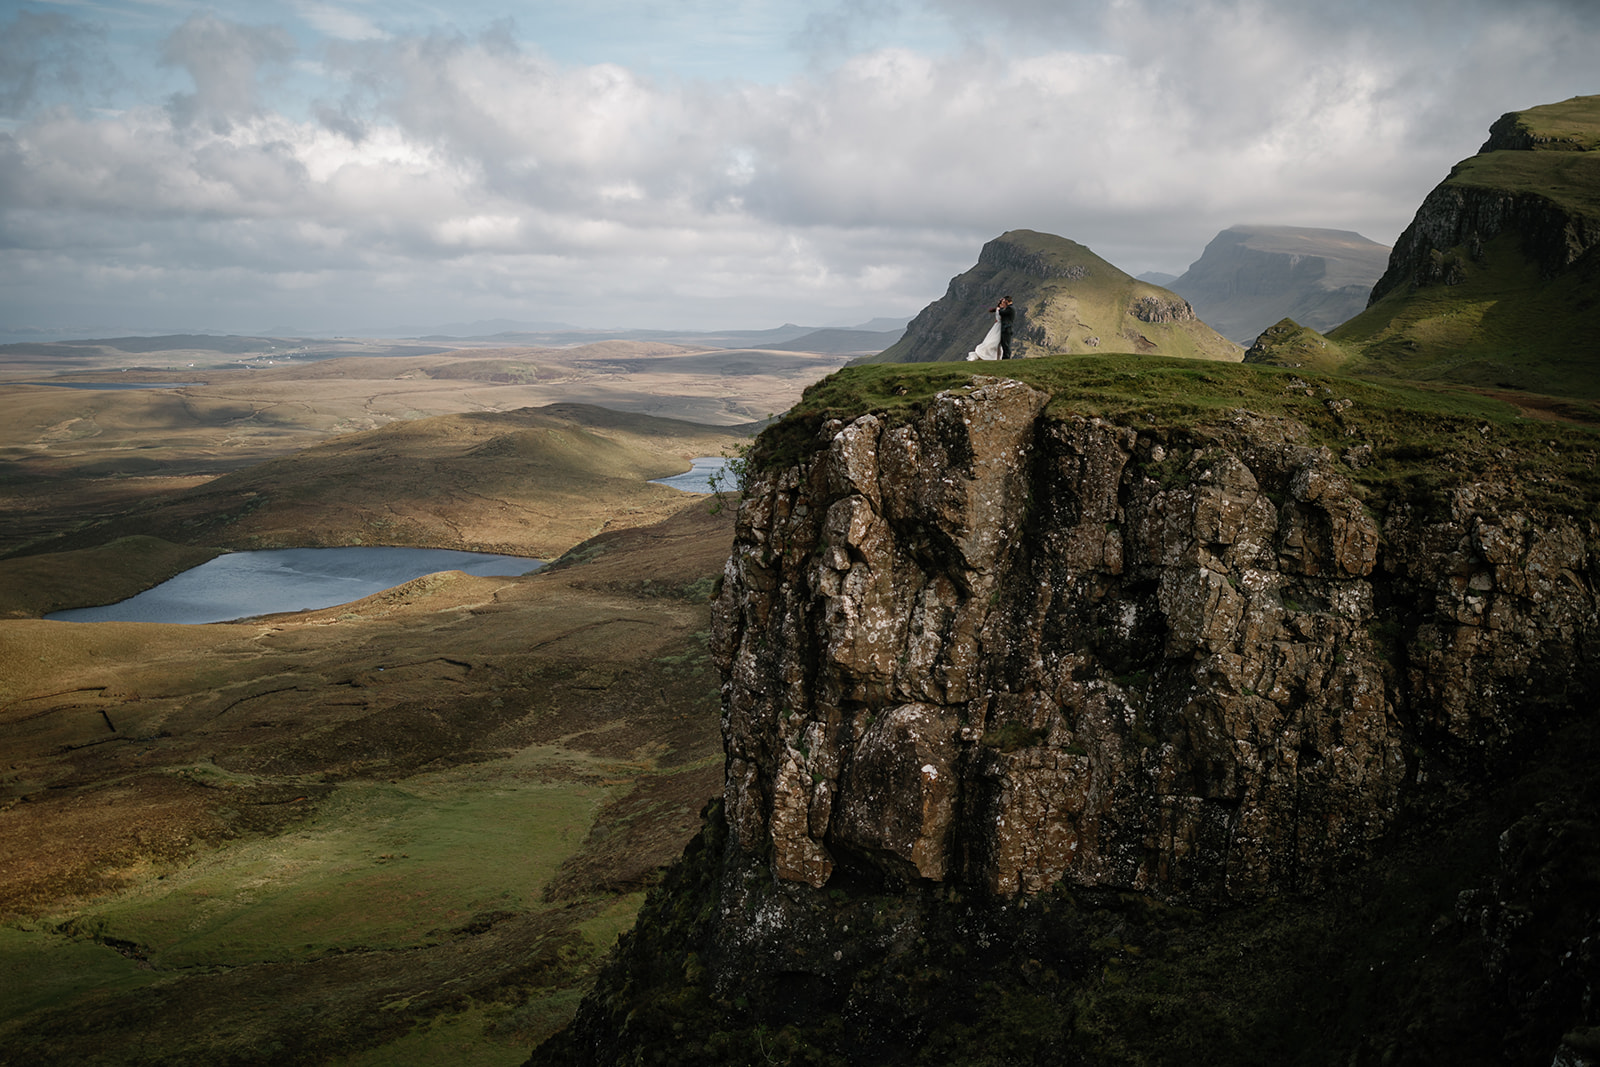 Nick and Becca, amidst the captivating Quiraing, share a moment of connection and love during their elopement photoshoot